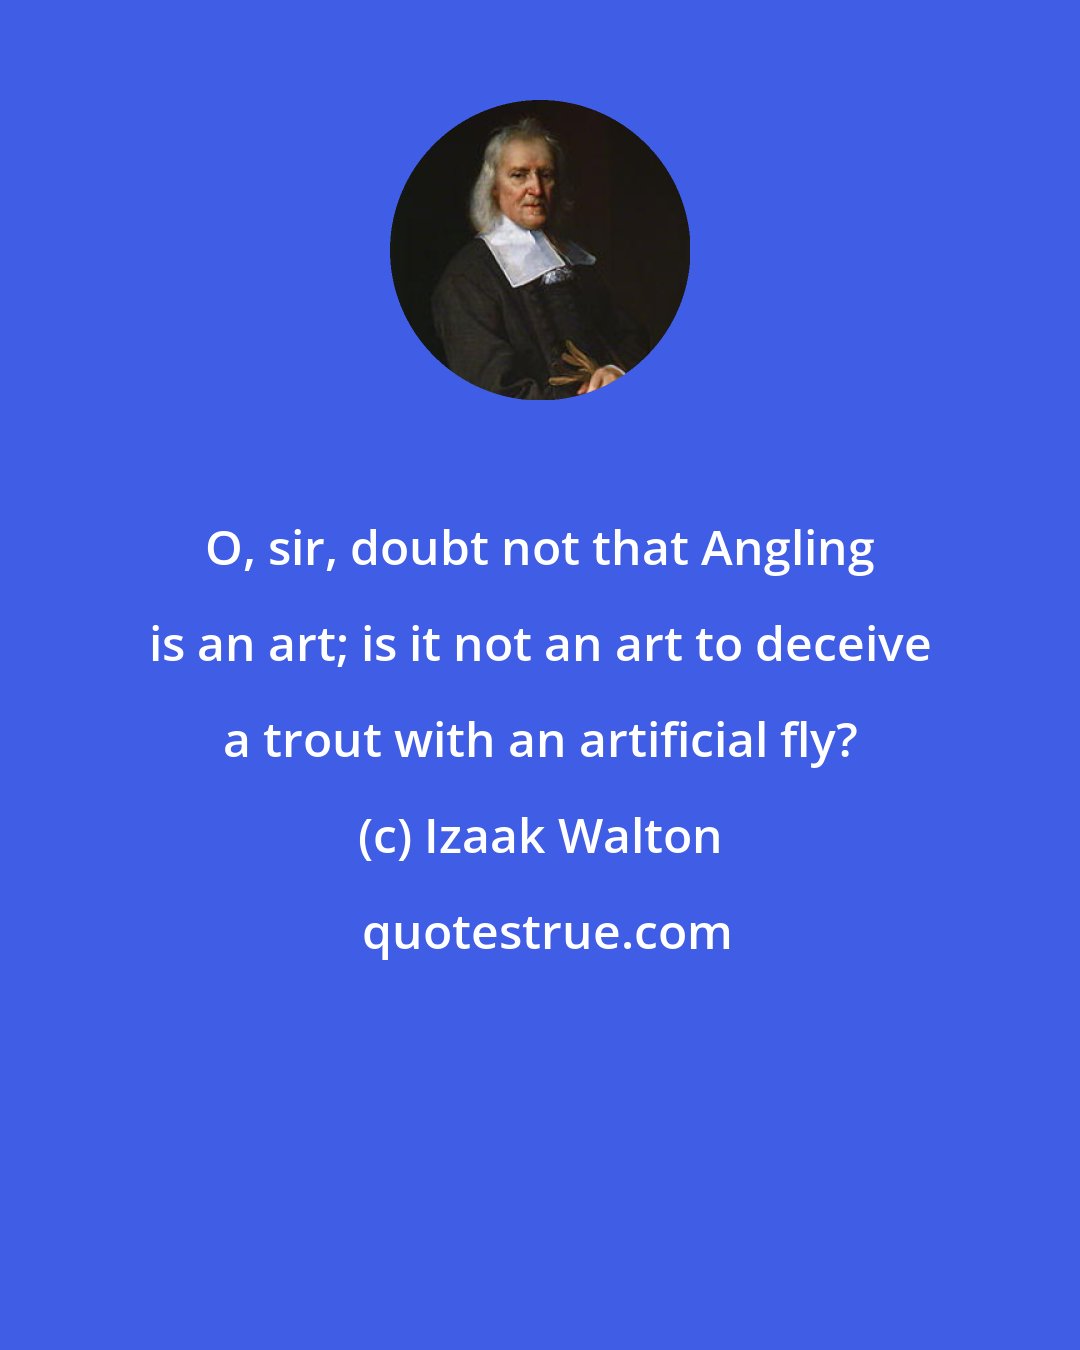 Izaak Walton: O, sir, doubt not that Angling is an art; is it not an art to deceive a trout with an artificial fly?